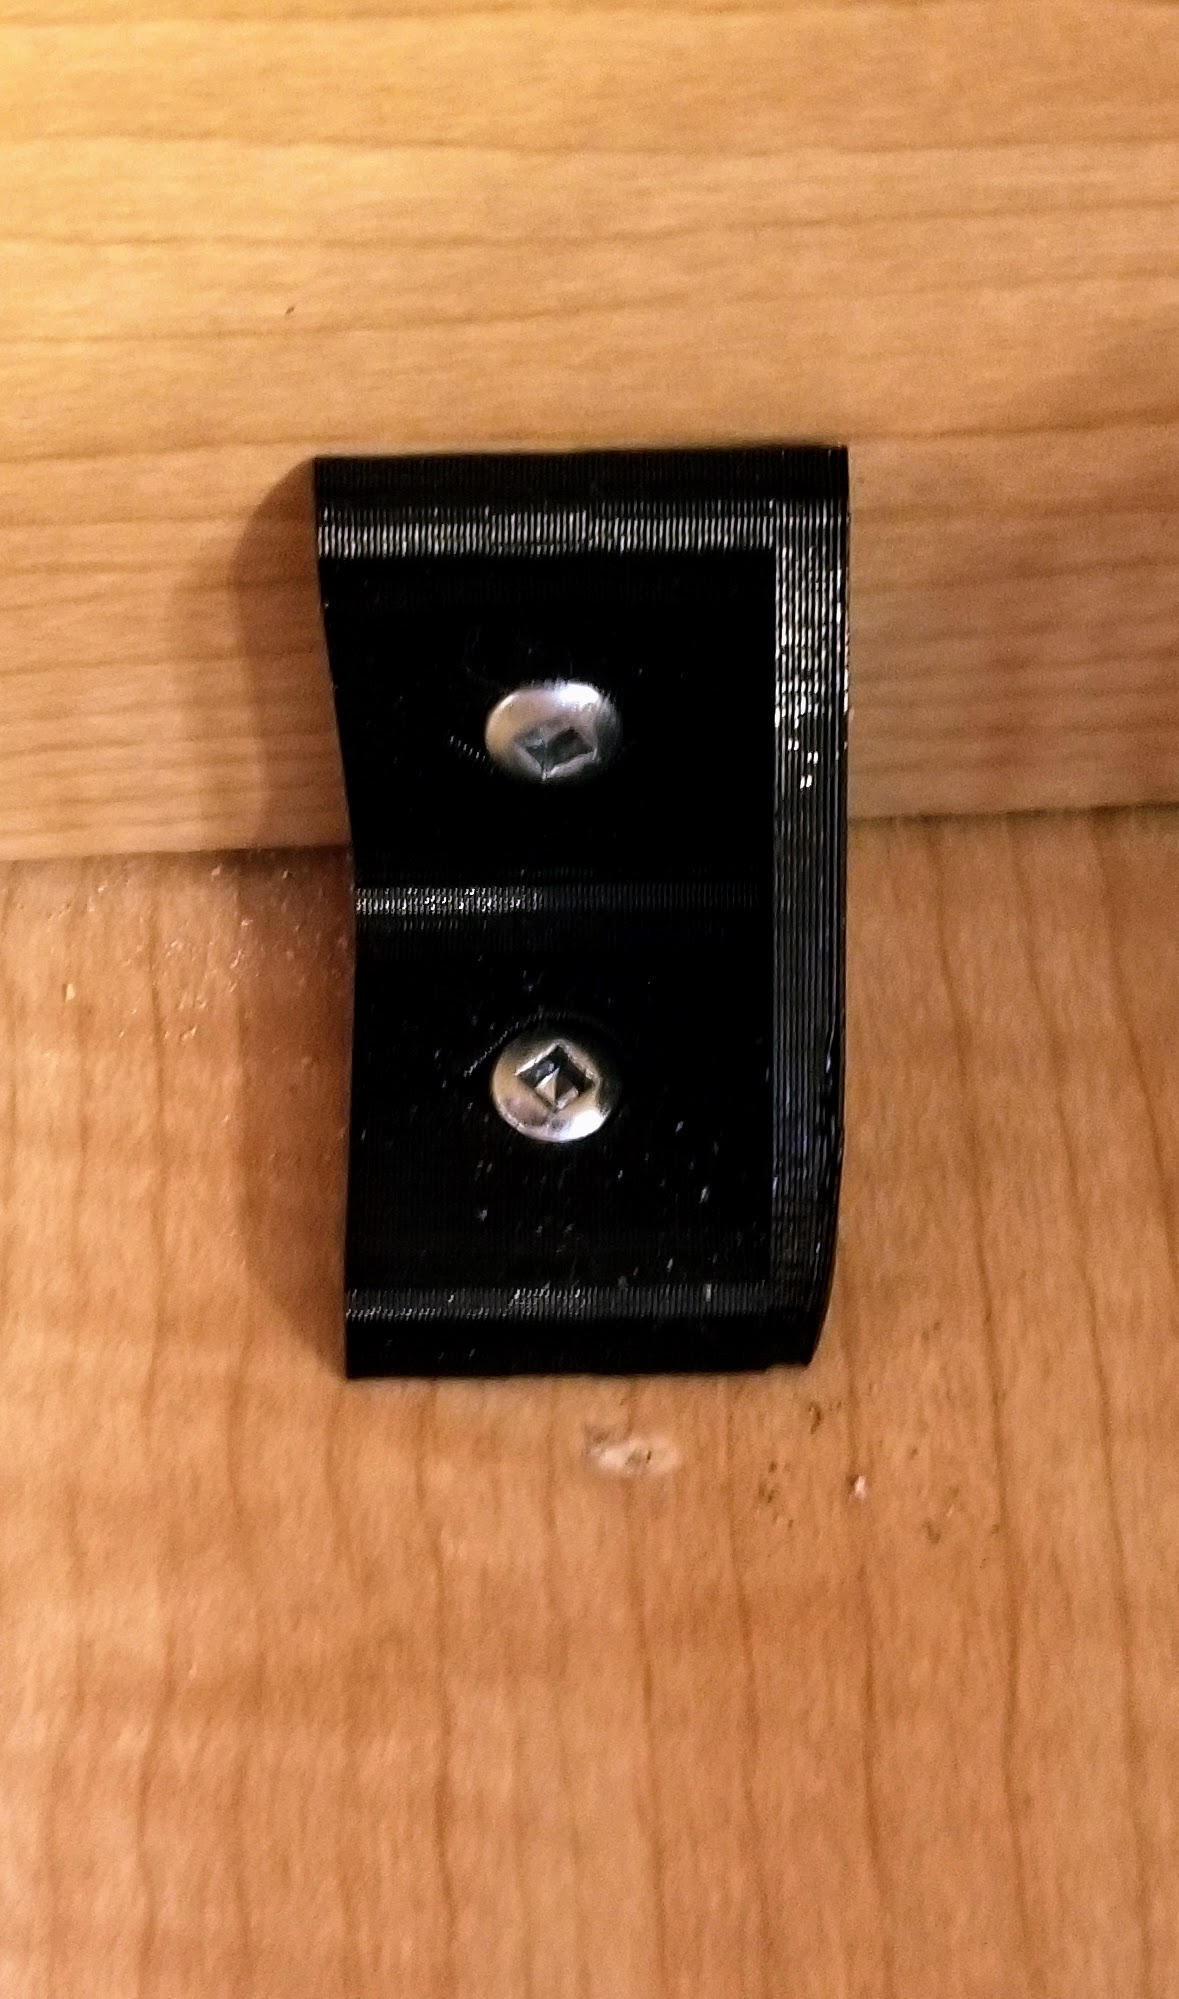 90 Degree Right-Angle Bracket for household repairs (#6 screws, customizable)